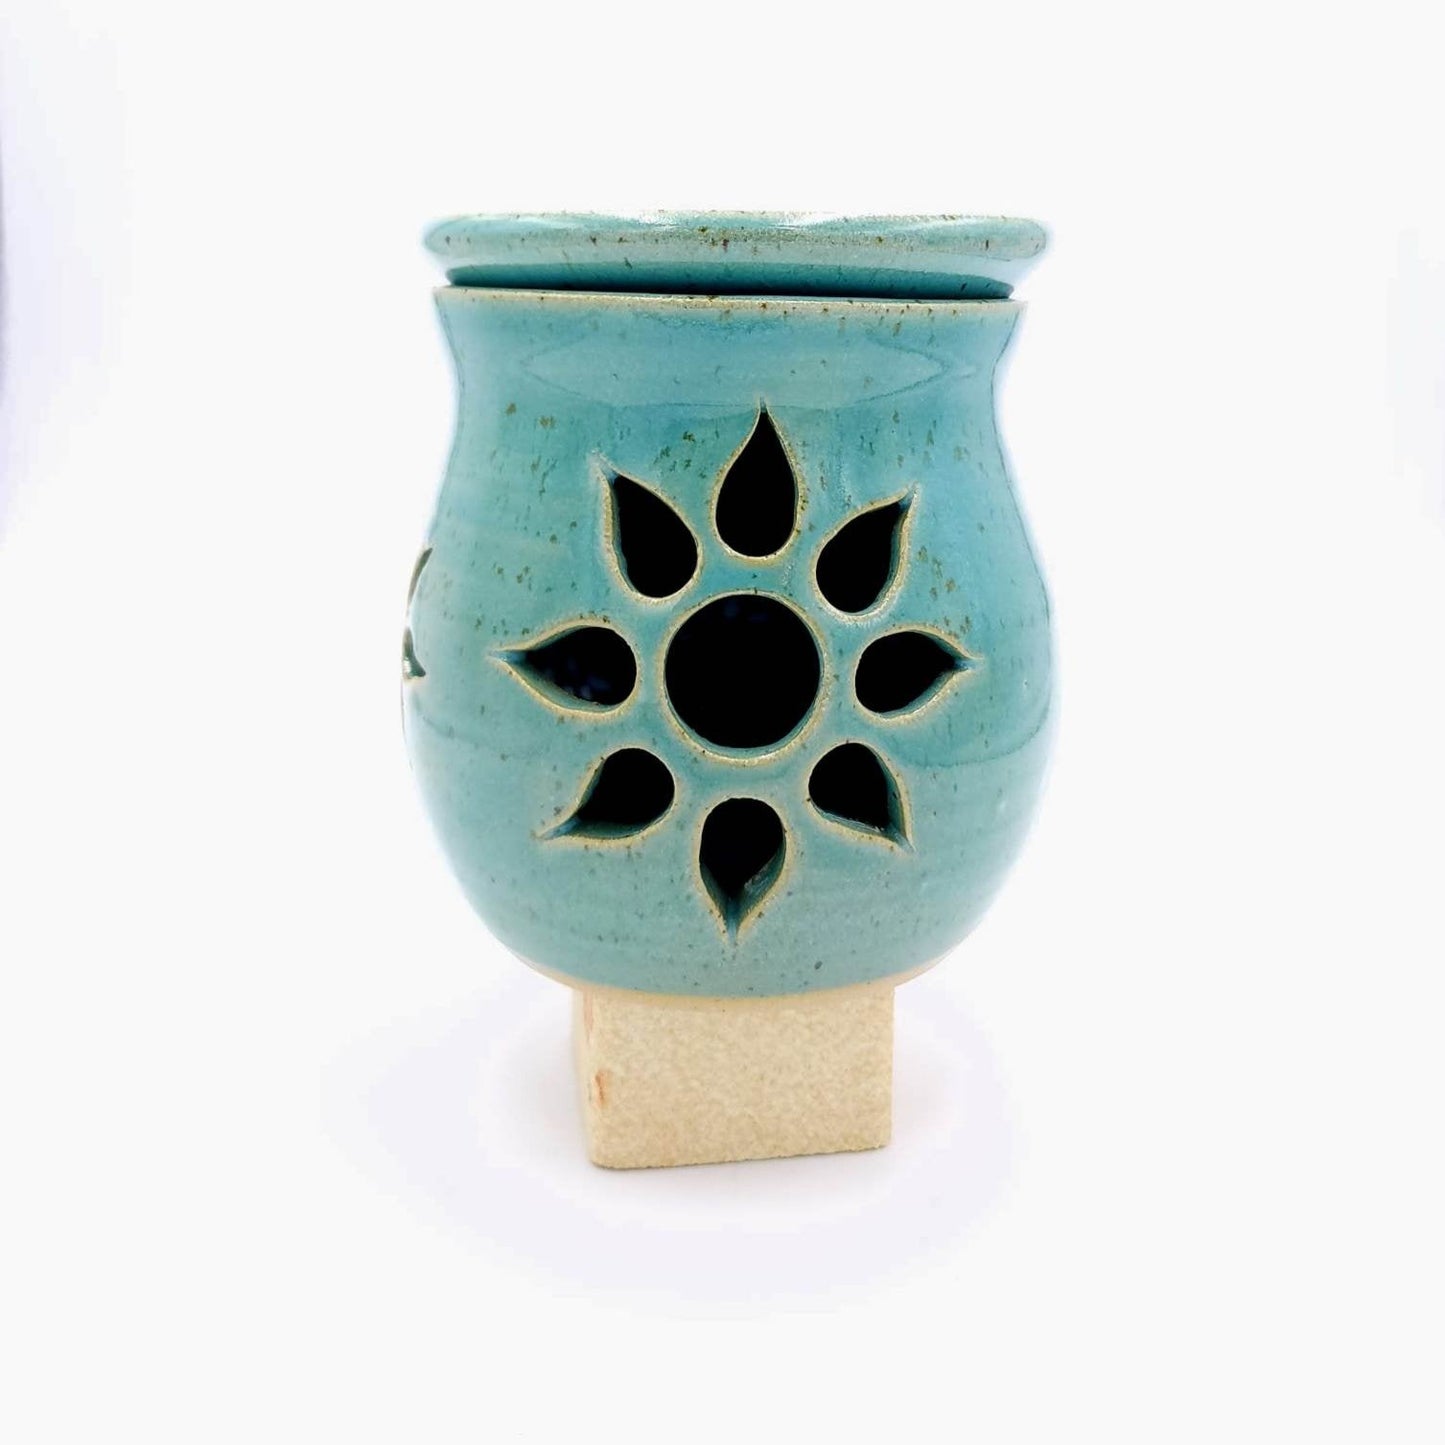 Handmade pottery wax melter. This piece has been hand carved with 3 sun burst and then glazed in a beautiful teal glaze. 10.5cm x 9.5cm